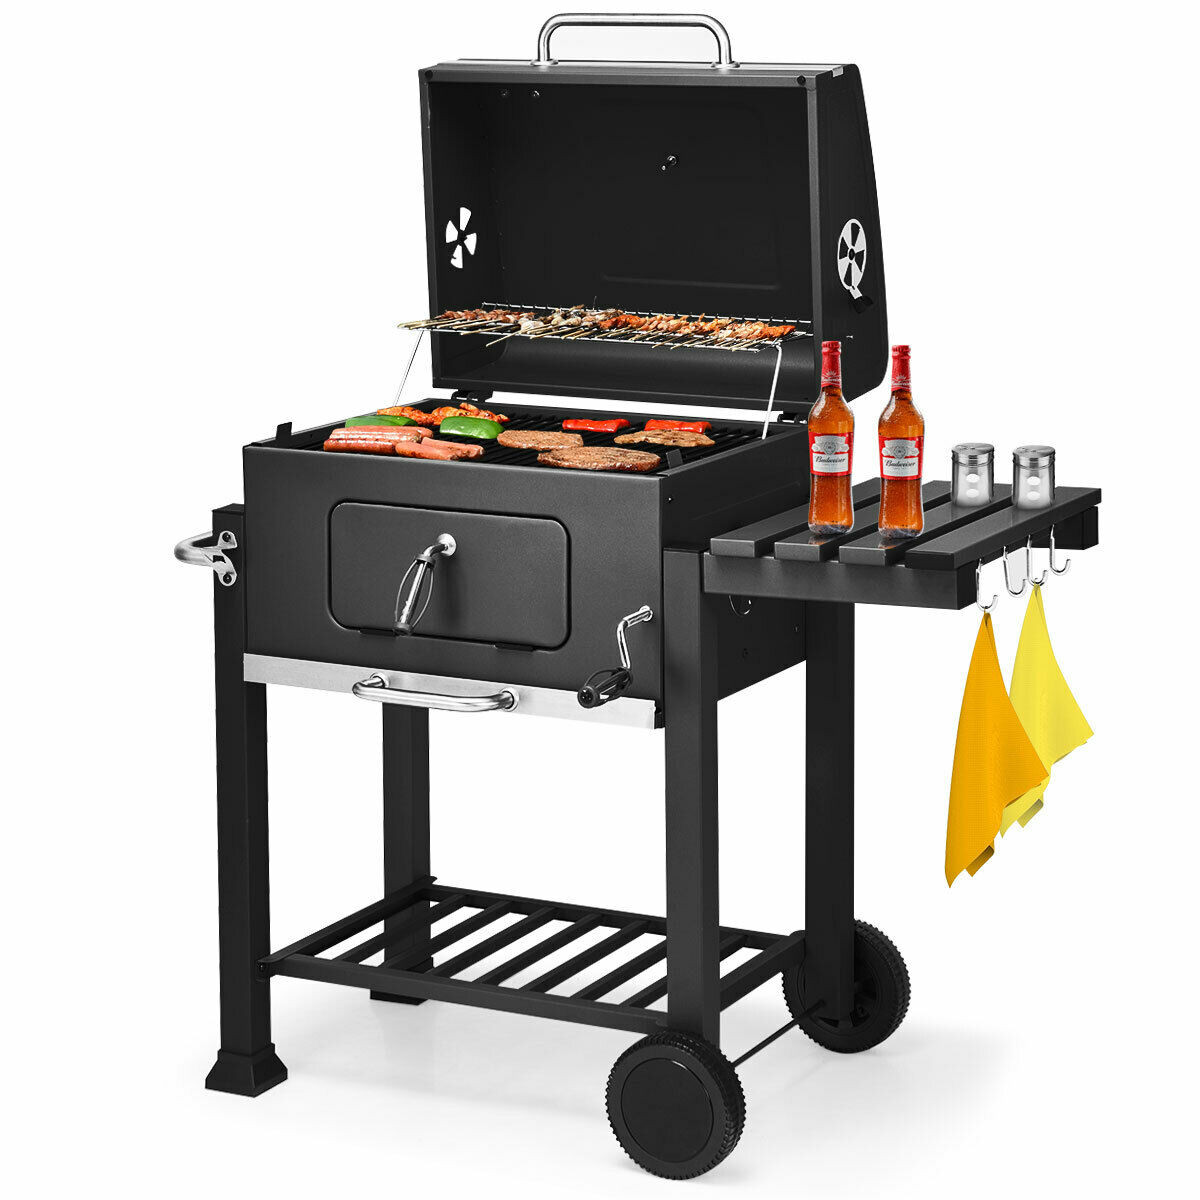 Outdoor Kitchen Charcoal Grill
 Costway Charcoal Grill Barbecue BBQ Grill Outdoor Patio